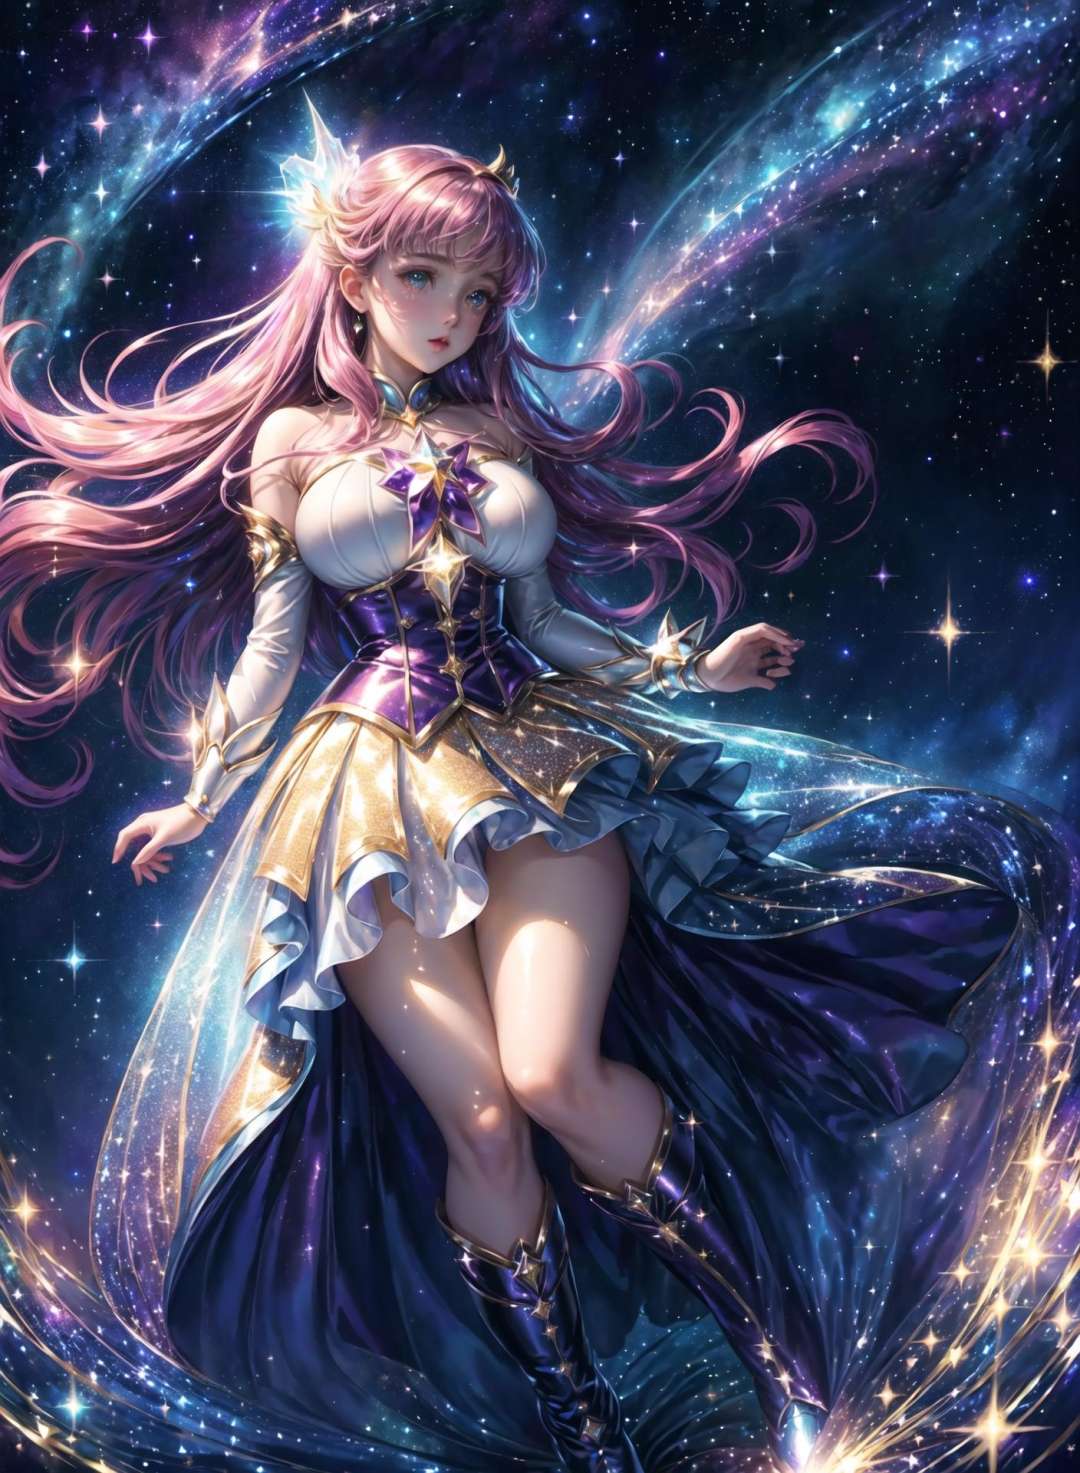 ((magical girl)), ((gorgeous starry sky background)), ((ultra-detailed)), ((cinematic lighting)), dynamic angle, (huge breast:1.2),floating, finely detailed, (glitter:1.2), (sparkle:1.2), (shine:1.2), classic, (painting:1.1), (sketch:1.1), (best quality), (masterpiece:1.2), (solo), beautiful detailed face, colorful hair, (long hair:1.2), (floating hair:1.2), (magical girl outfit), detailed outfit, (magical effects:1.3), (flowing skirt:1.2), (cute boots:1.1), (transparent fabric:1.1), (twinkle:1.2), (glow:1.2), (radiance:1.2), (flicker:1.2), (dazzle:1.2)